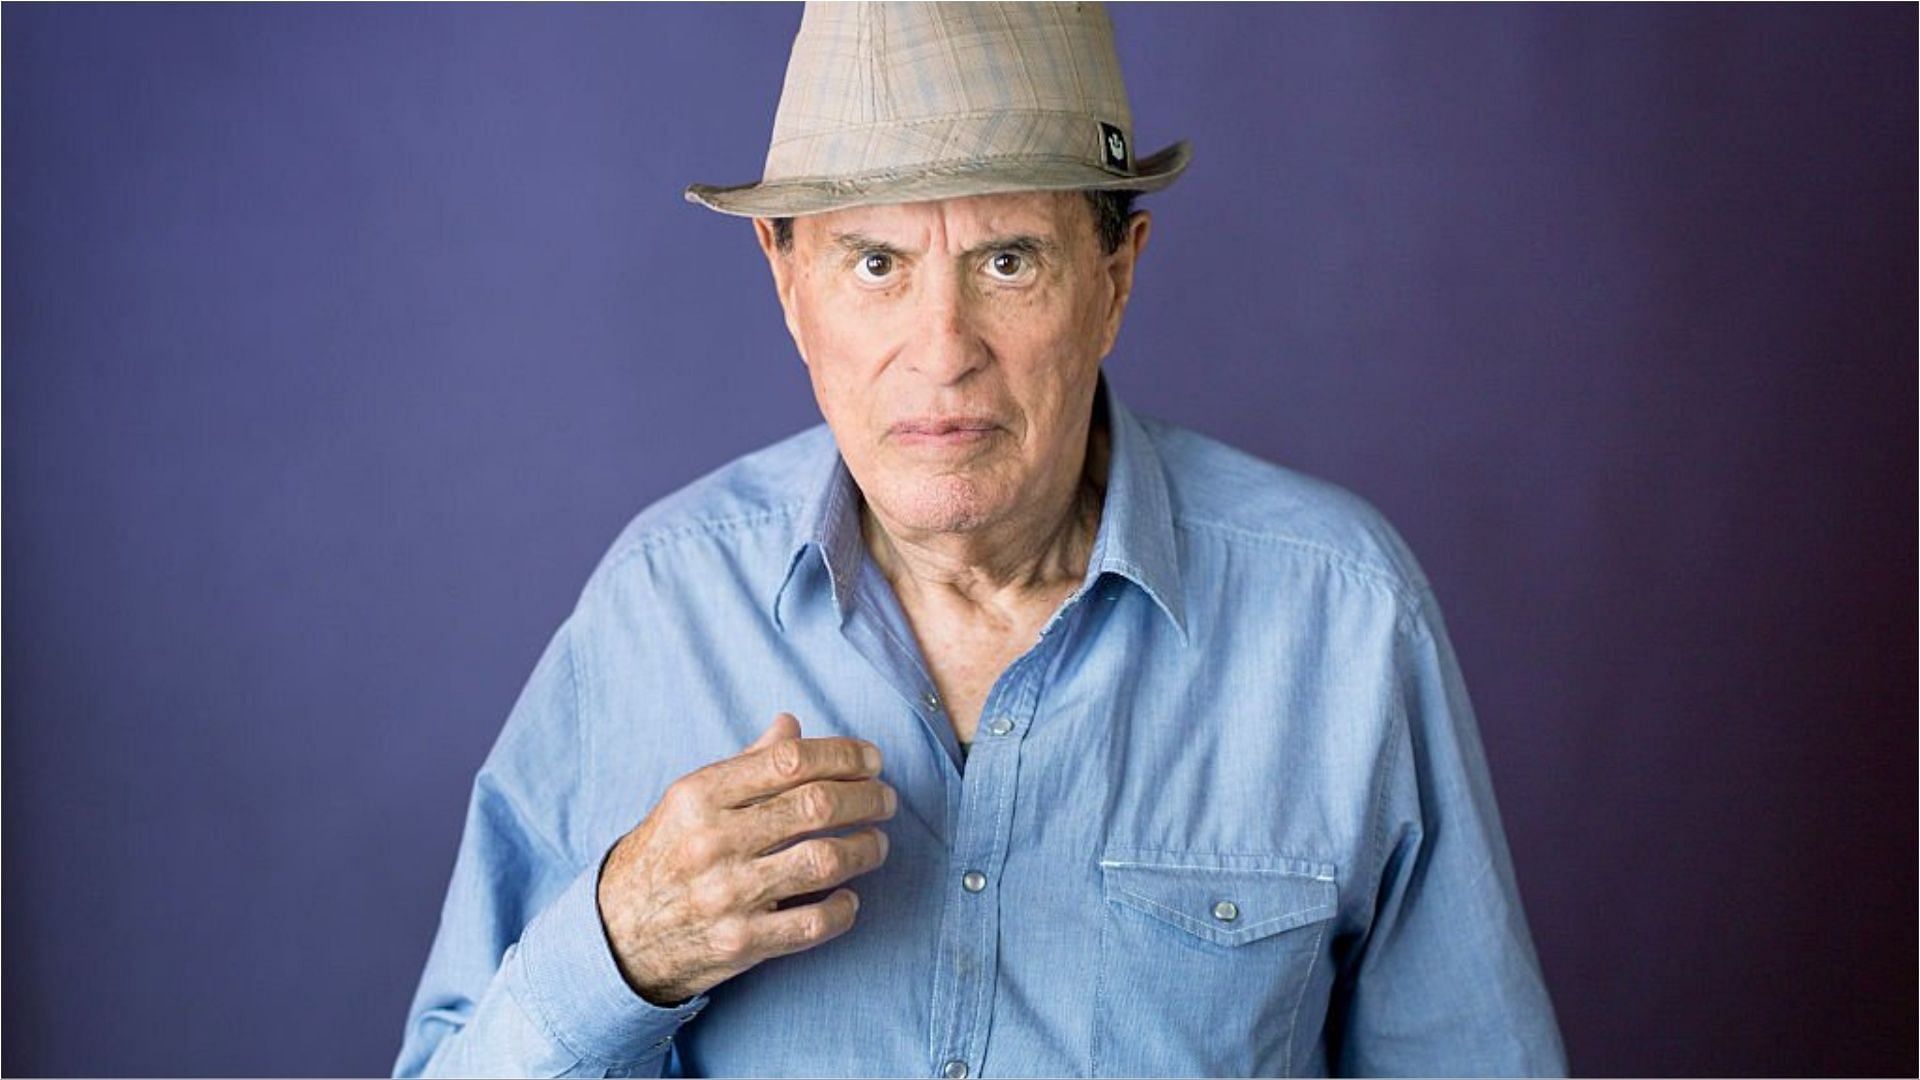 Kenneth Anger recently died at the age of 96 (Image via Pal Hansen/Getty Images)